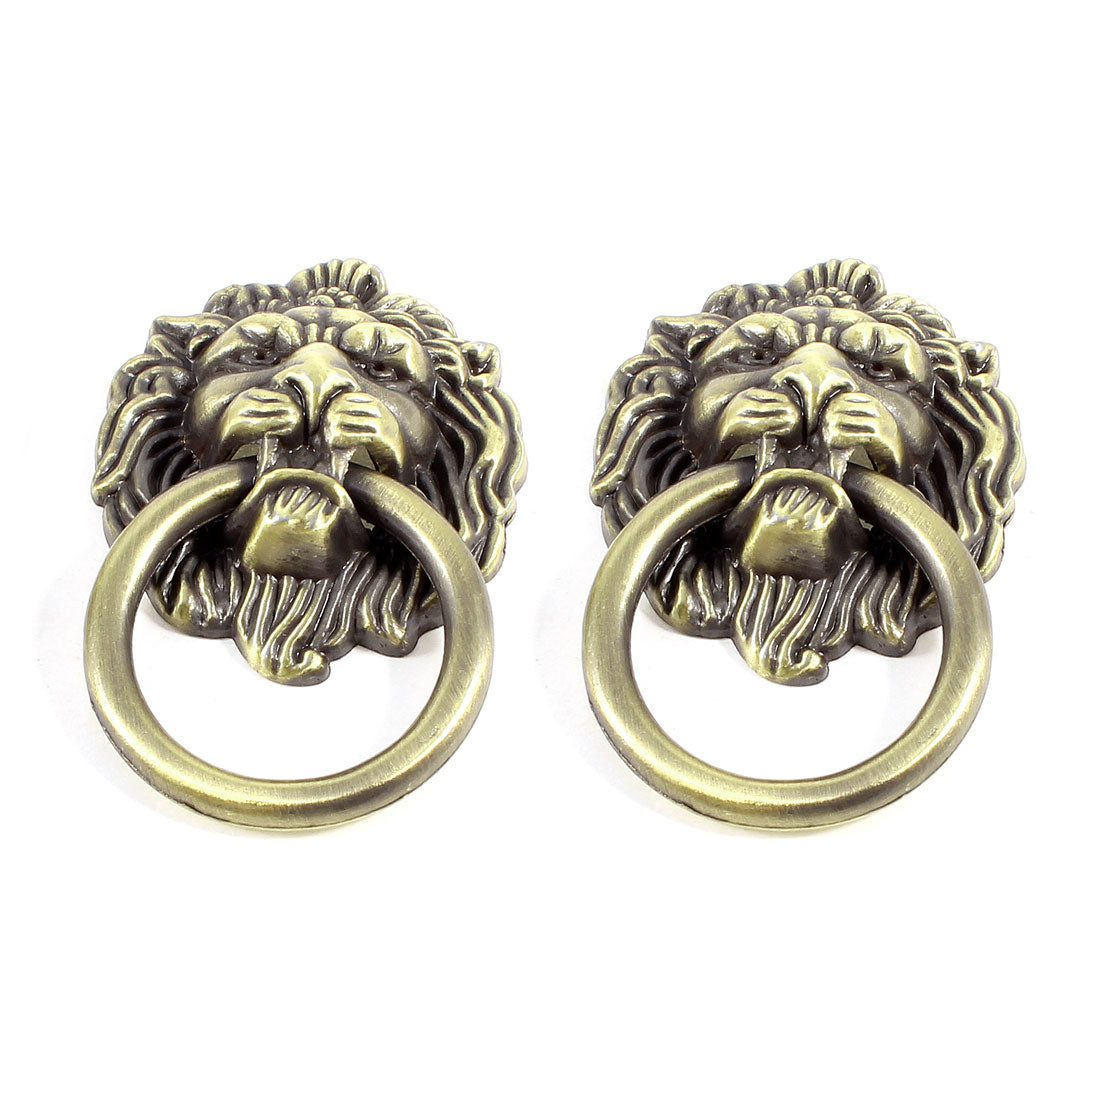 uxcell Uxcell Bronze Tone Metal Lion Head Design Drawer Cabinet Gate Door Pull Handle Knobs Pair